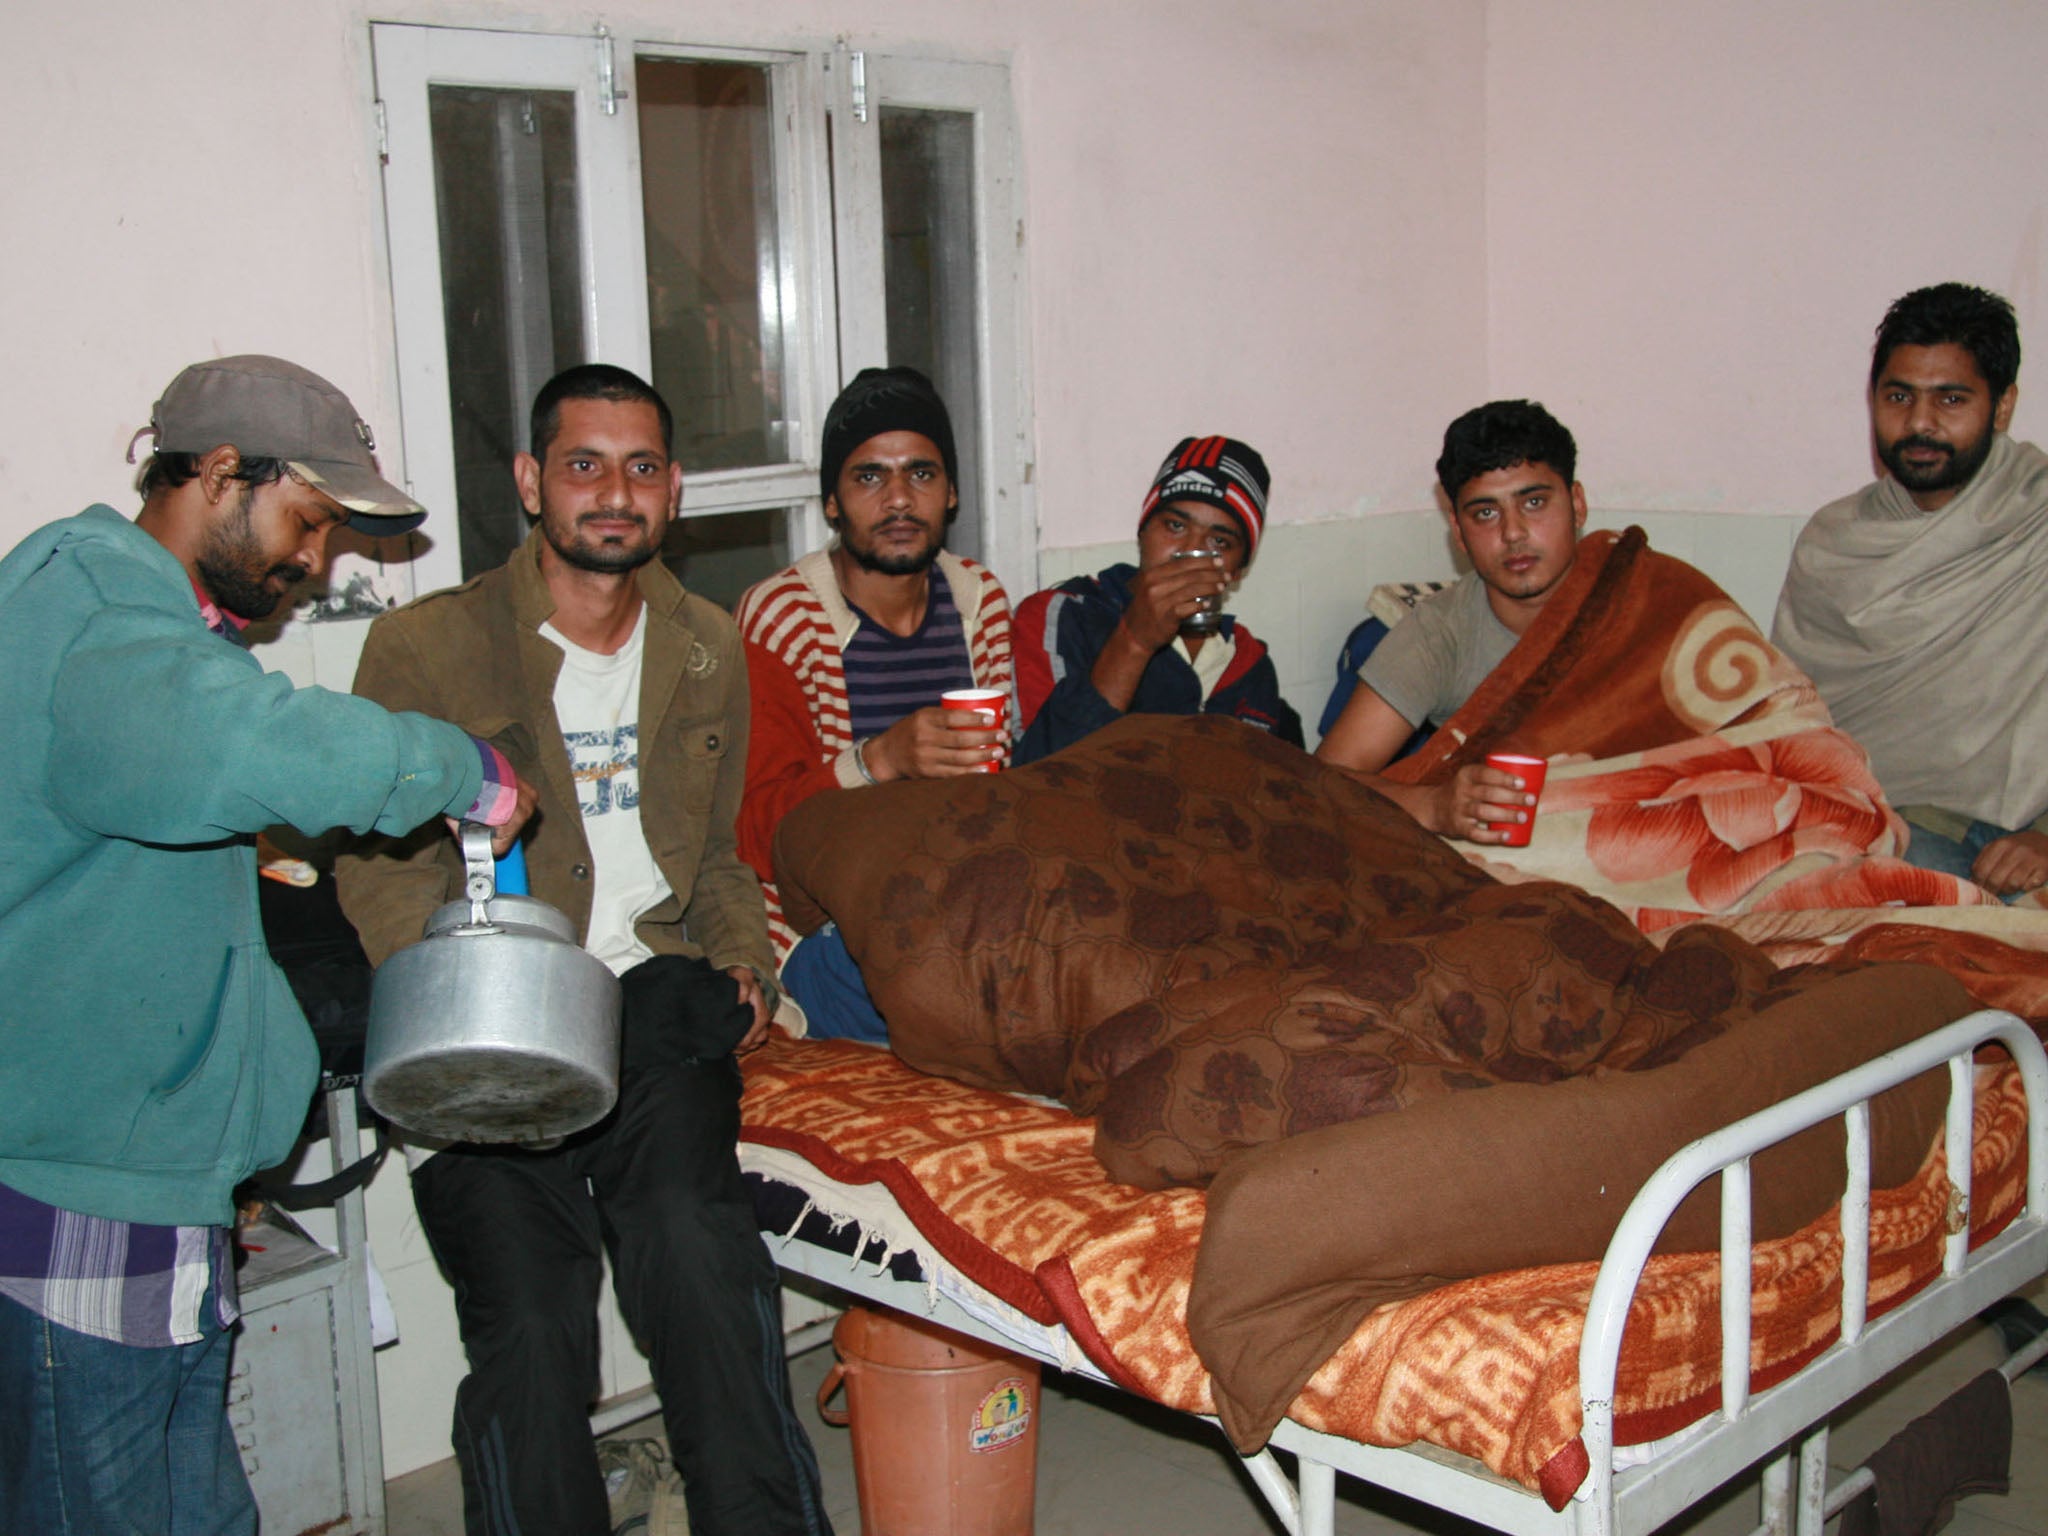 Recovering drug addicts take tea and huddle under blankets in a de-addiction center in the northern Indian city of Tarn Taran Sahib